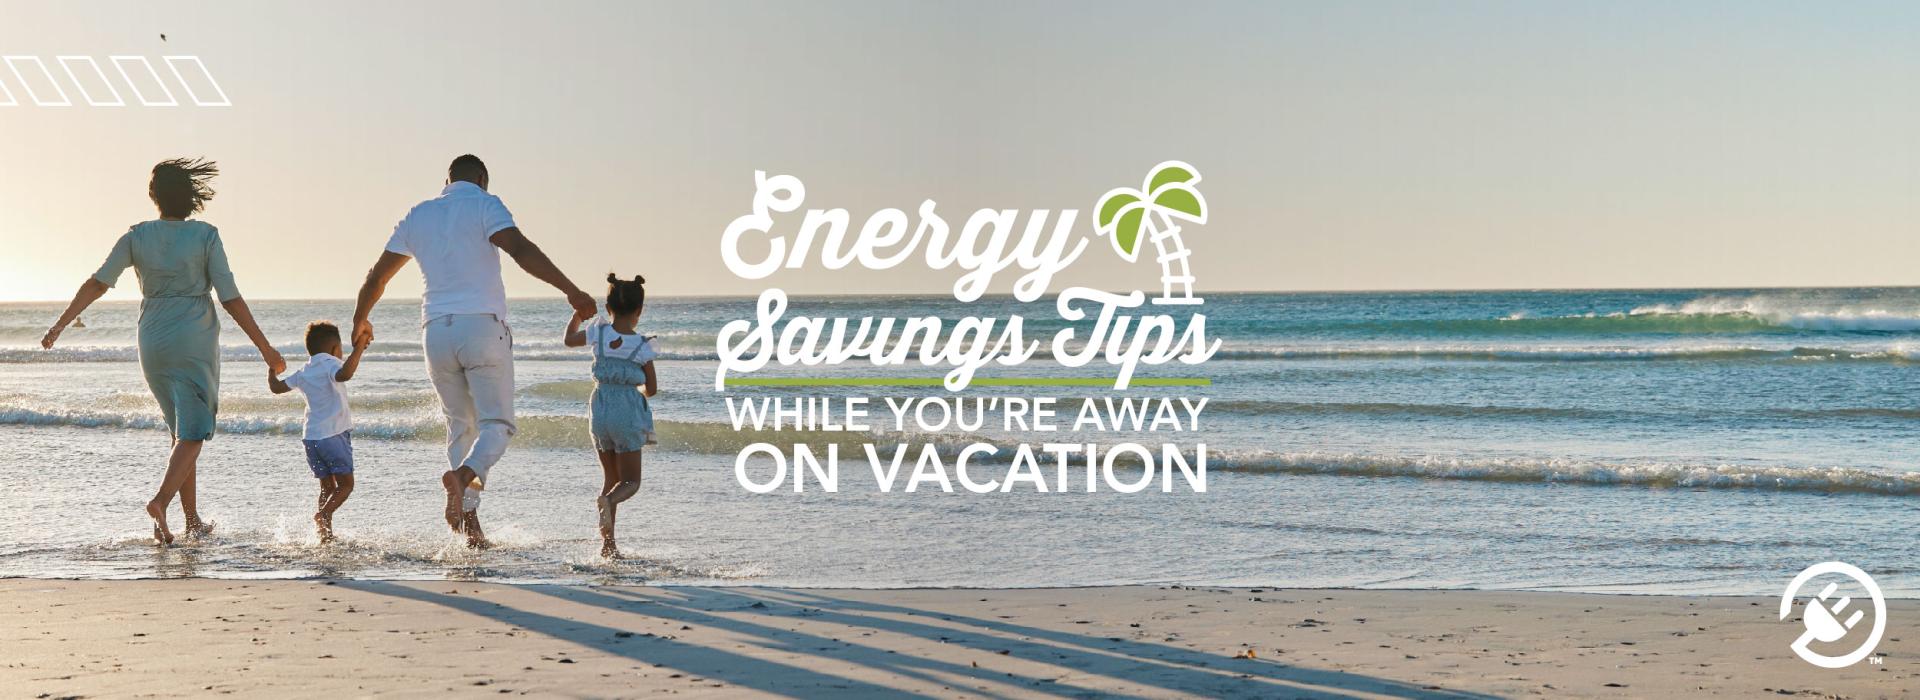 Energy Saving Tips While You're Away on Vacation